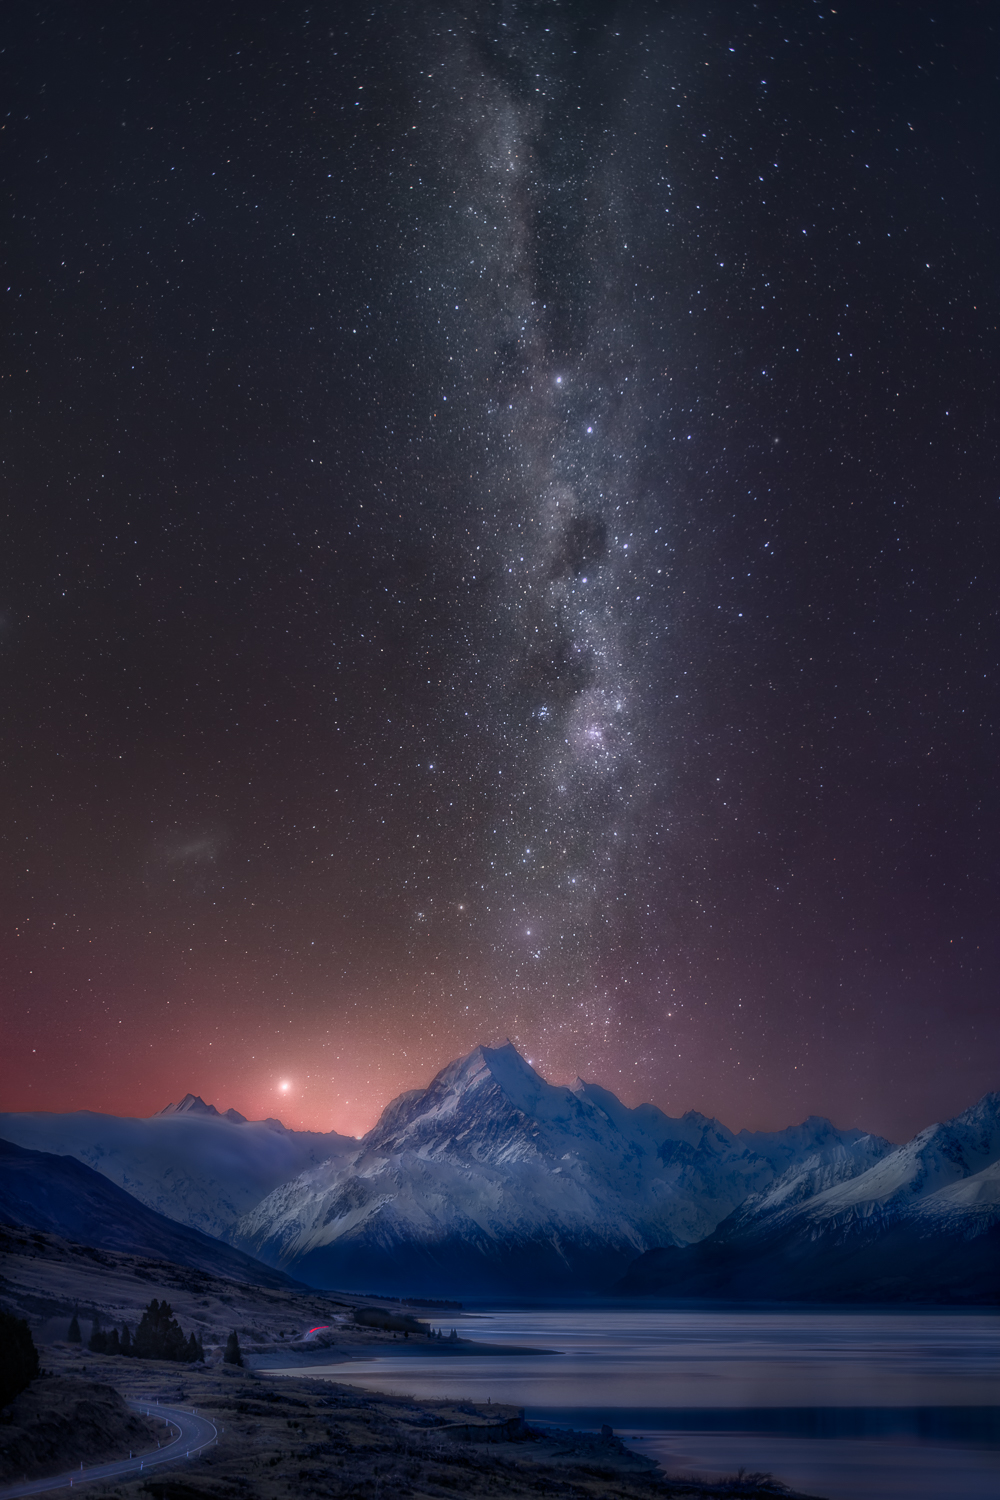 Aoraki Mount Cook National Park at Night Astro, New Zealand 6 day tour | We Are Raw Photography